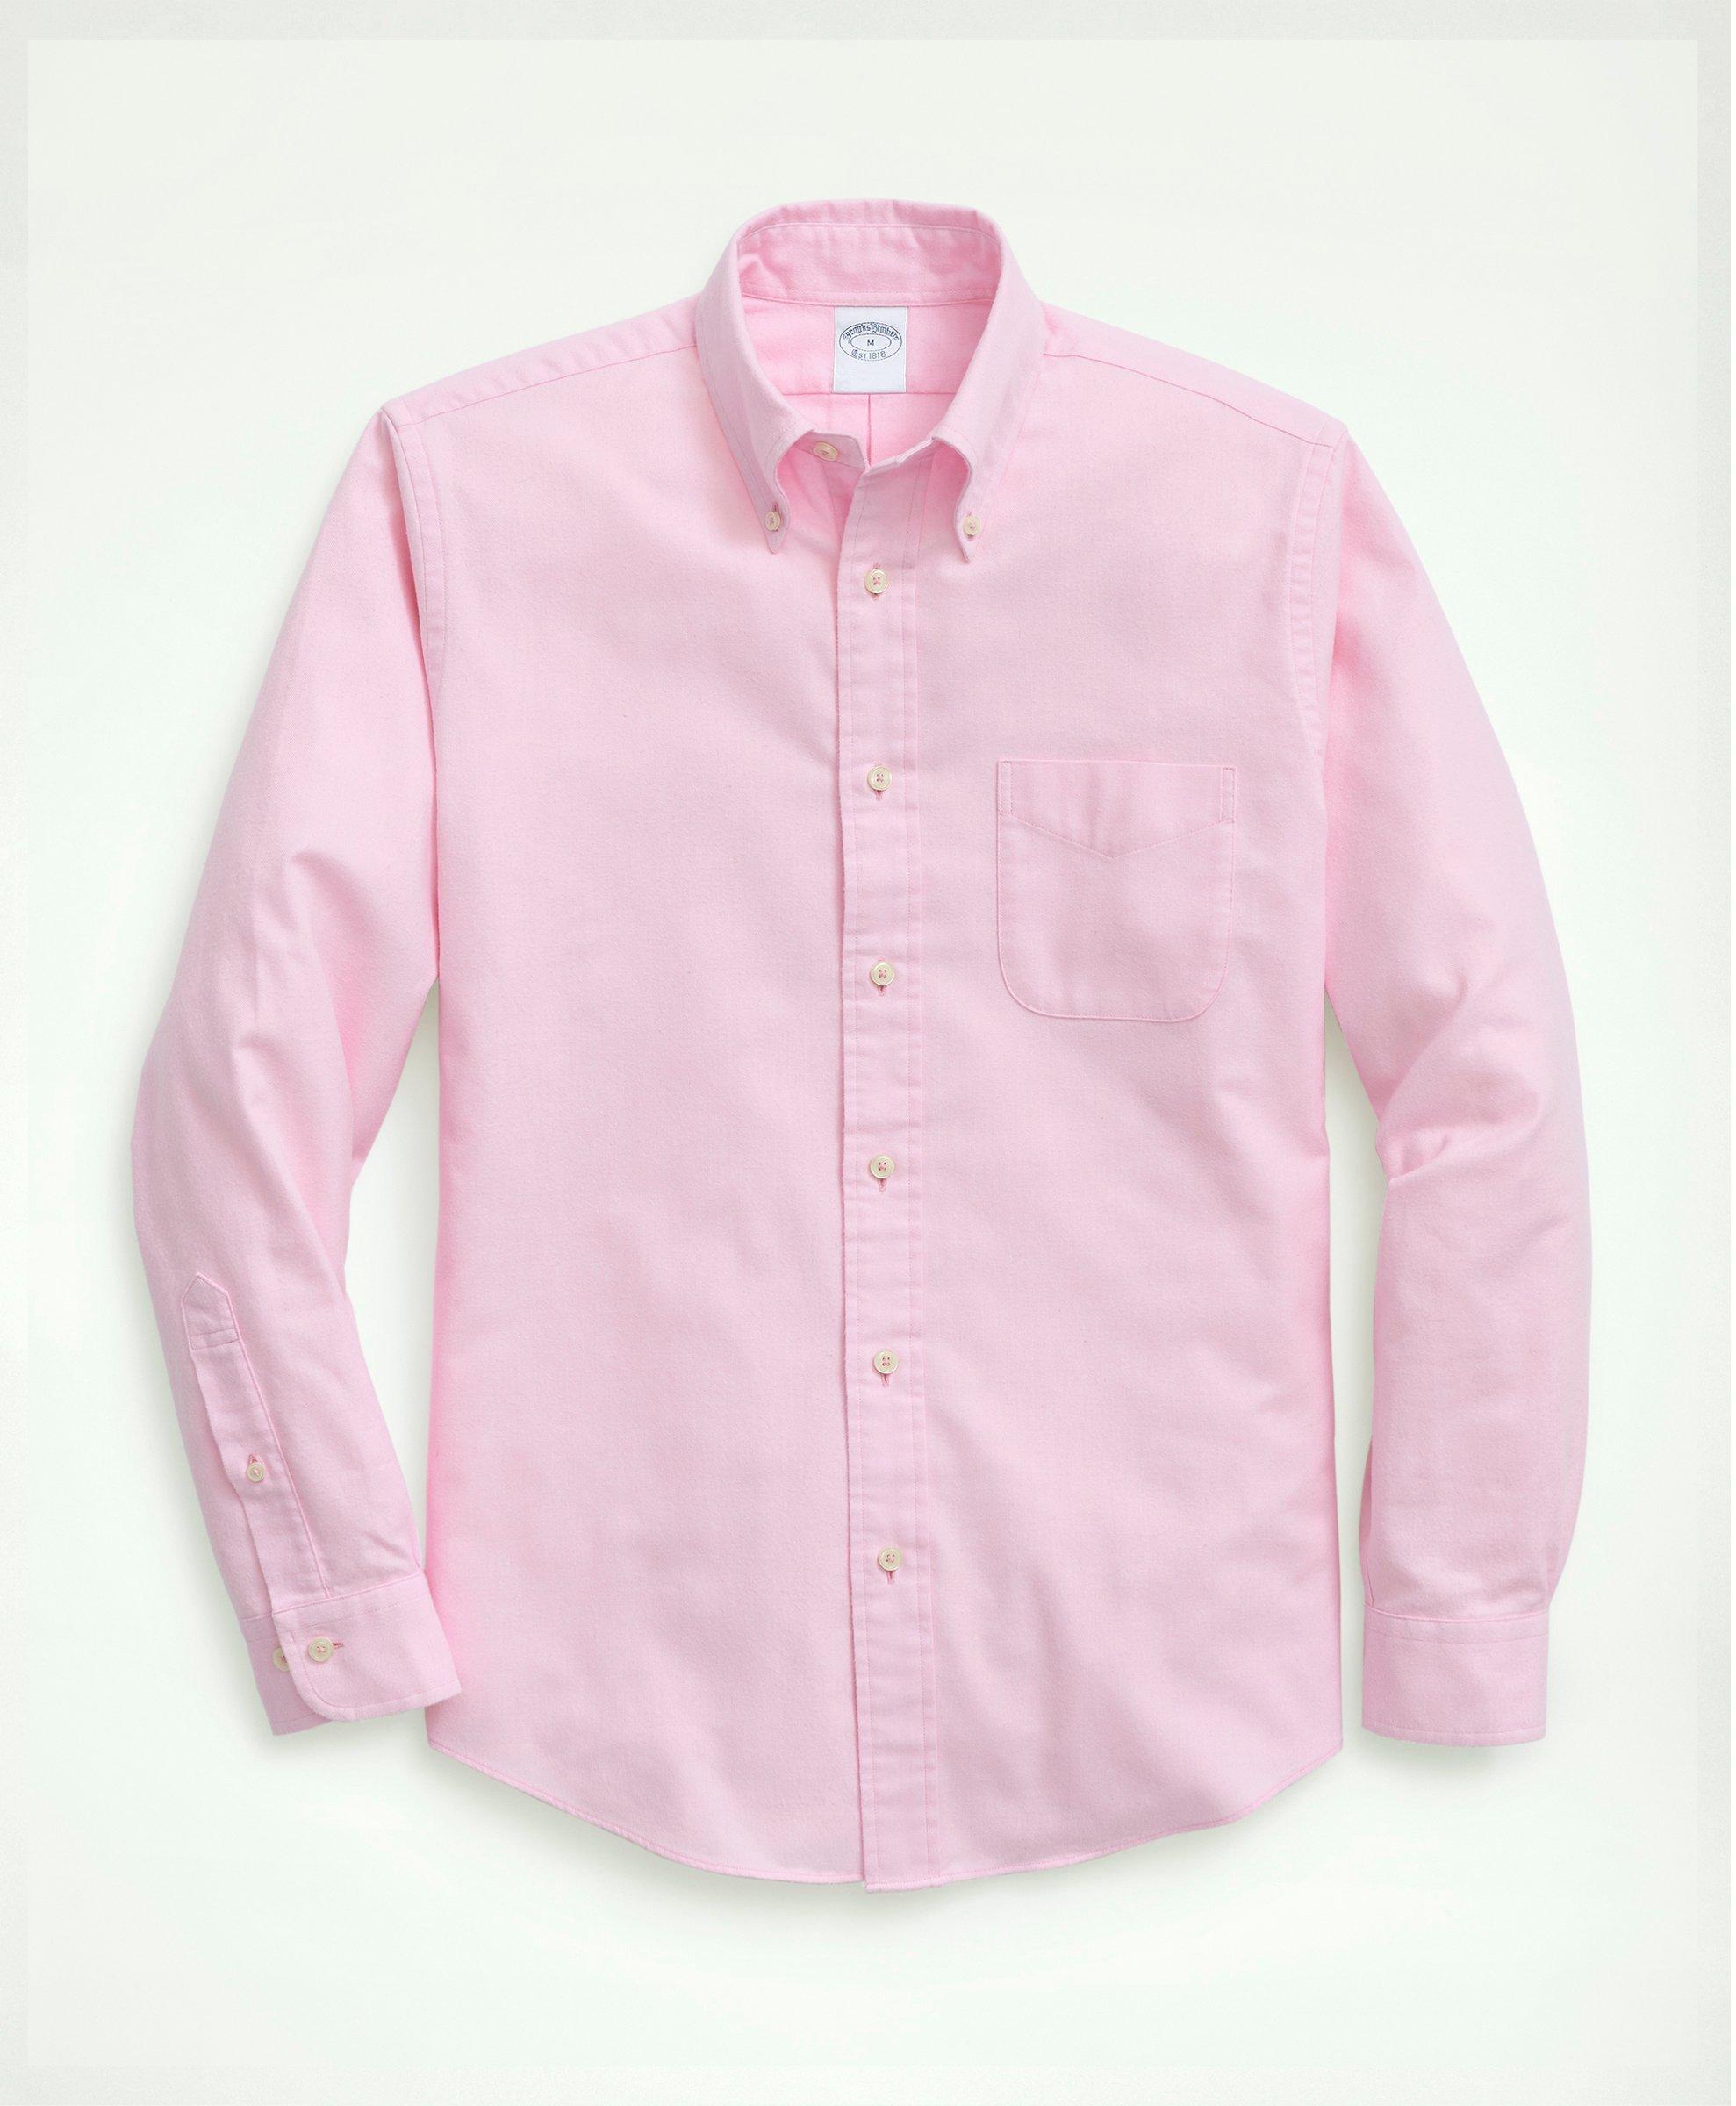 Brooks Brothers Portuguese Flannel Polo Button Down Collar Shirt | Light Pink | Size Medium